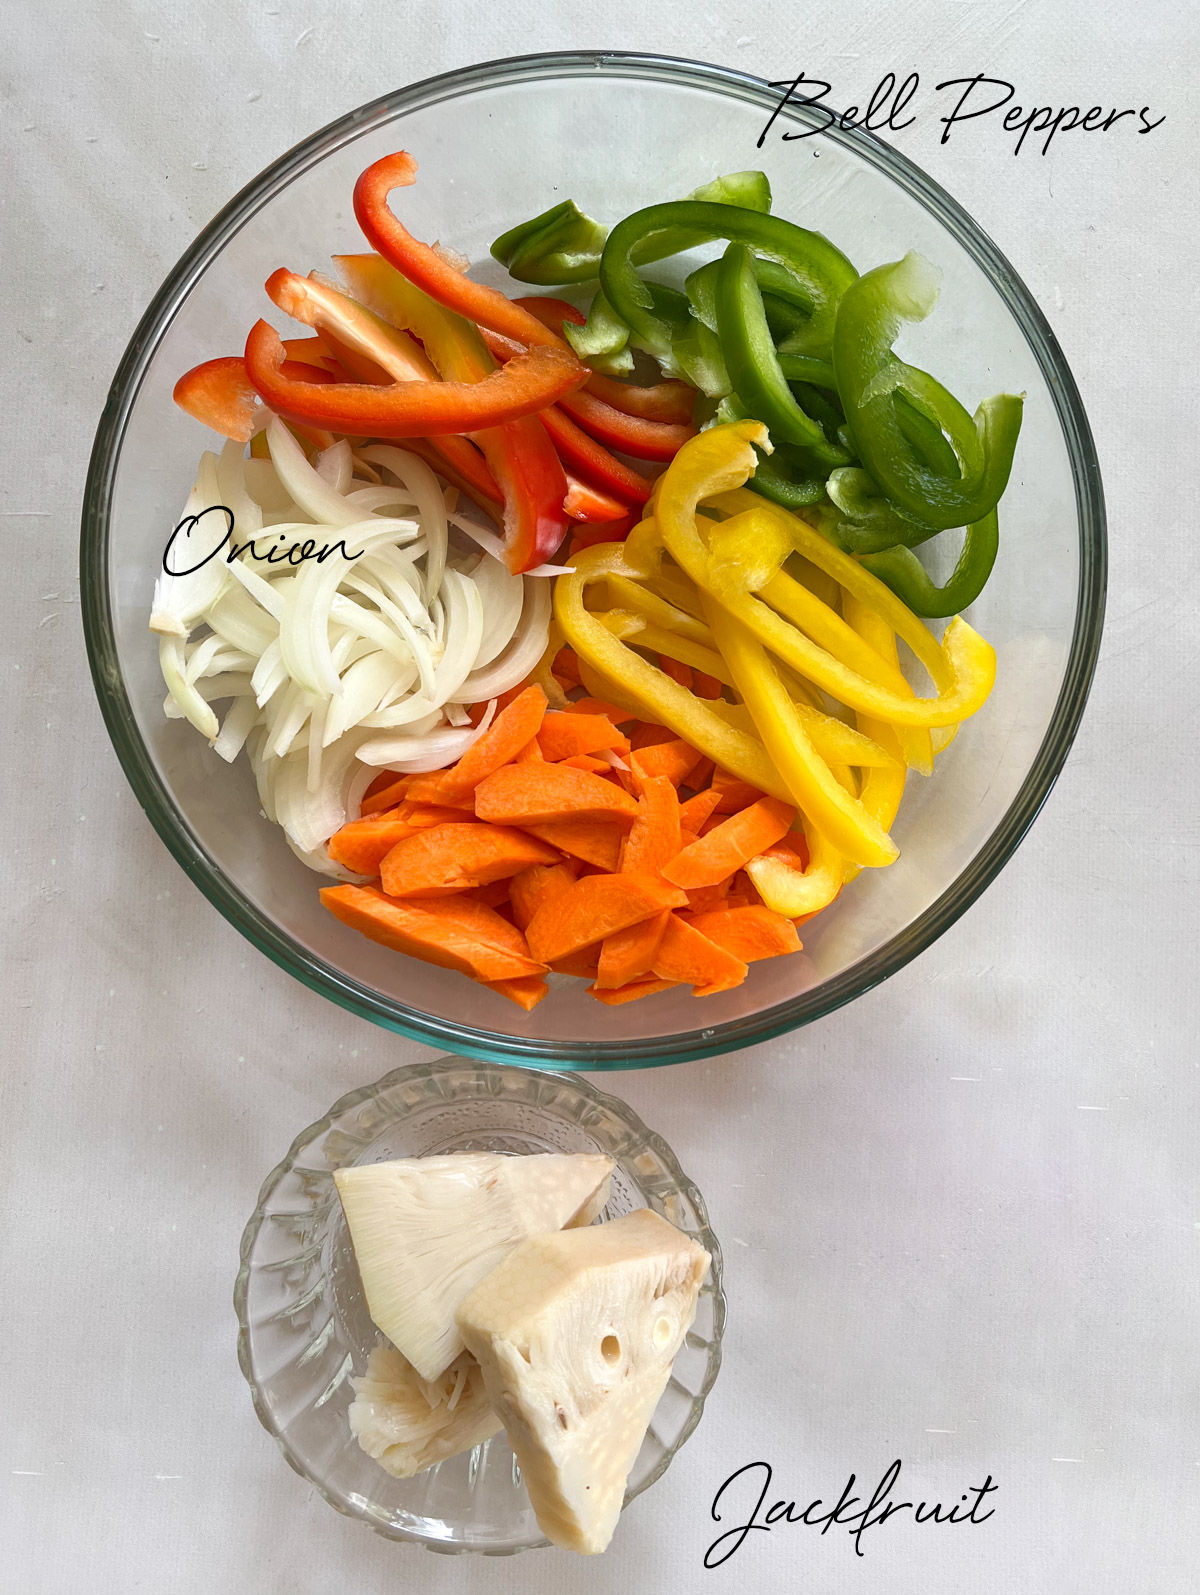 sliced bell peppers, onions and pieces of jackfruit in glass bowls